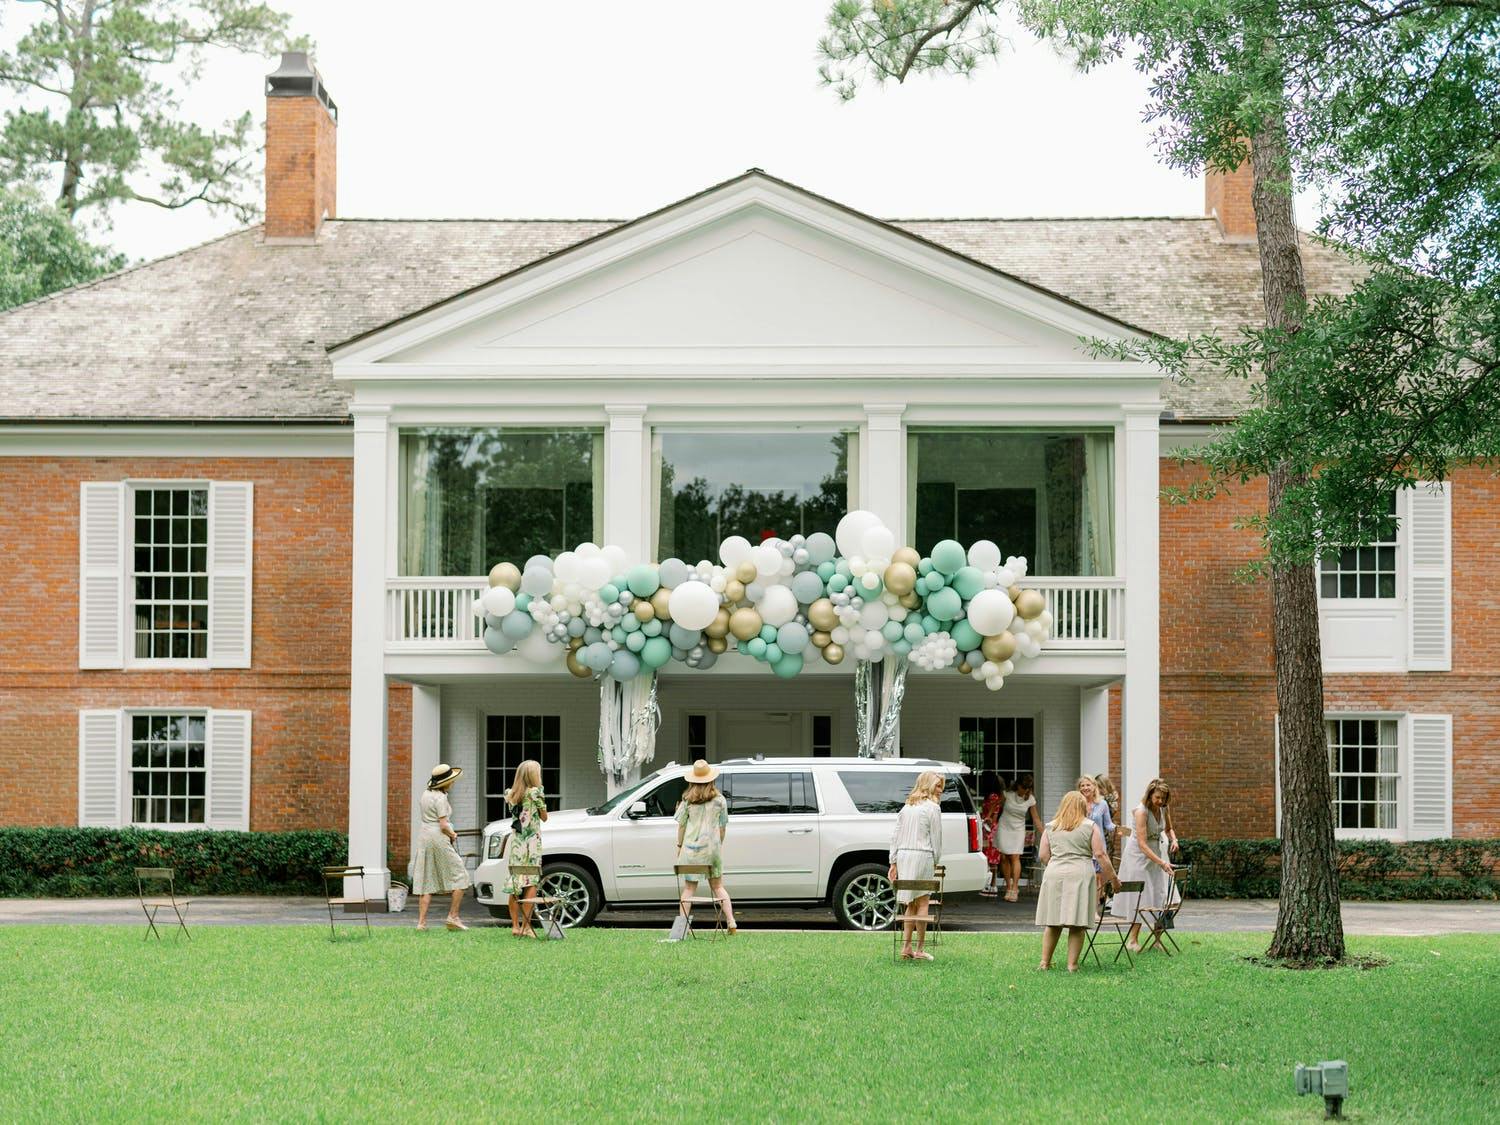 Drive By Baby Shower With Balloon Cloud and Rain Fringe Tassels | PartySlate